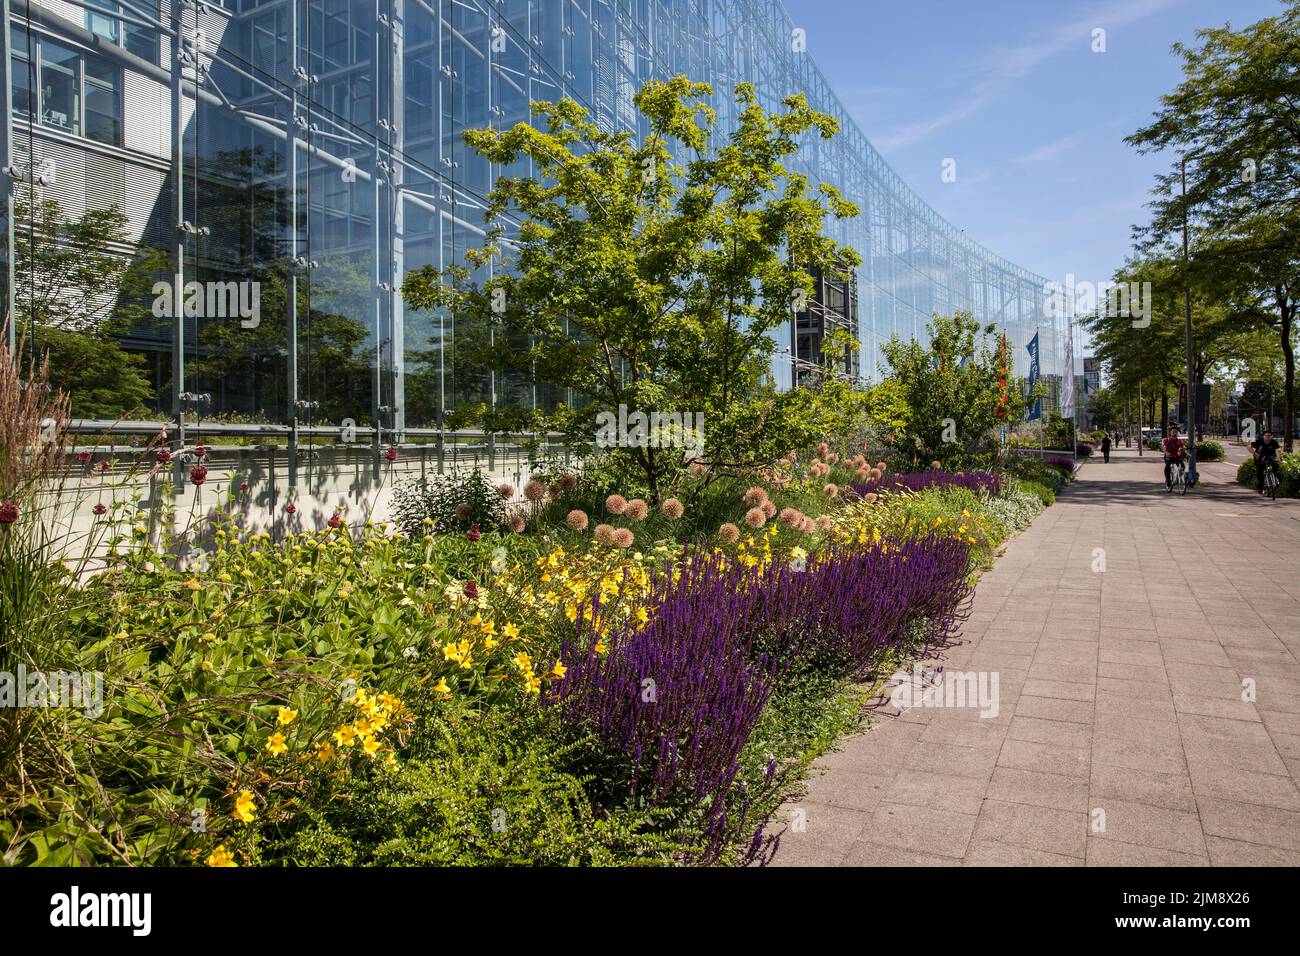 the Neven DuMont building of the DuMont Media Group on Amsterdamer street, Cologne, Germany. To support biodiversity, the company has planted a wide s Stock Photo